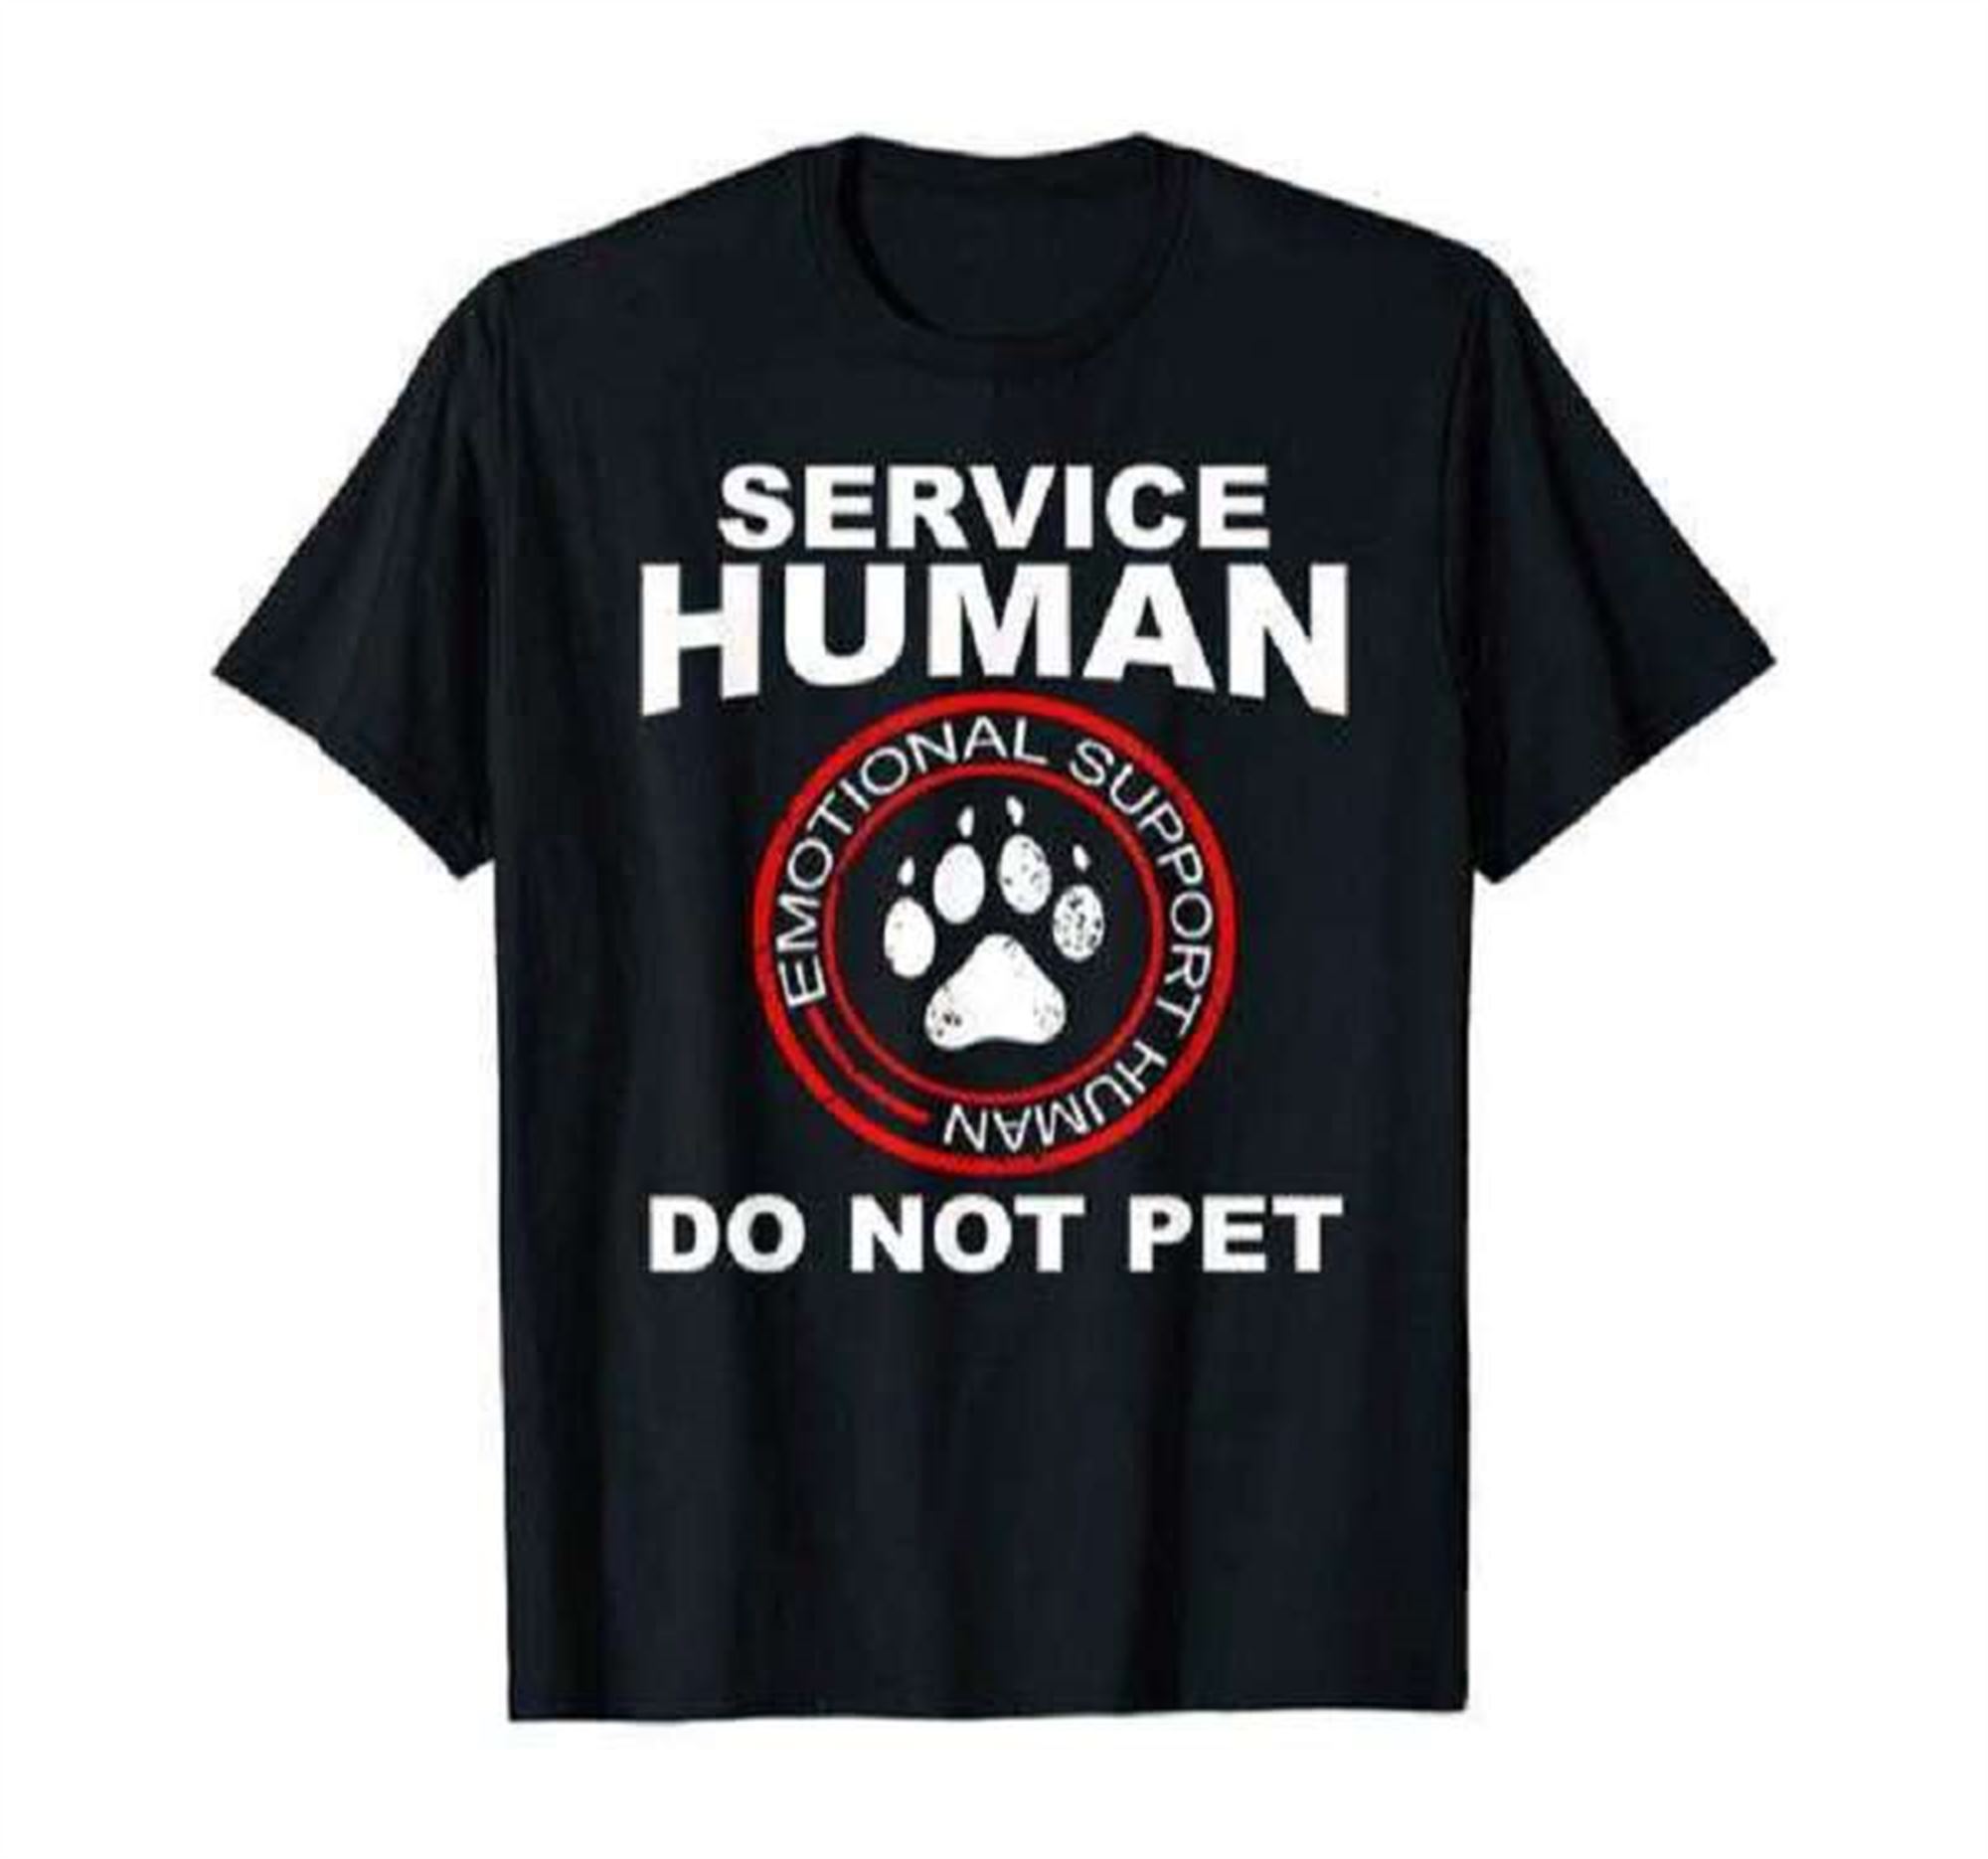 Service Human Shirt Funny Dog Owner Emotional Support Human T-shirt Plus Size Up To 5x